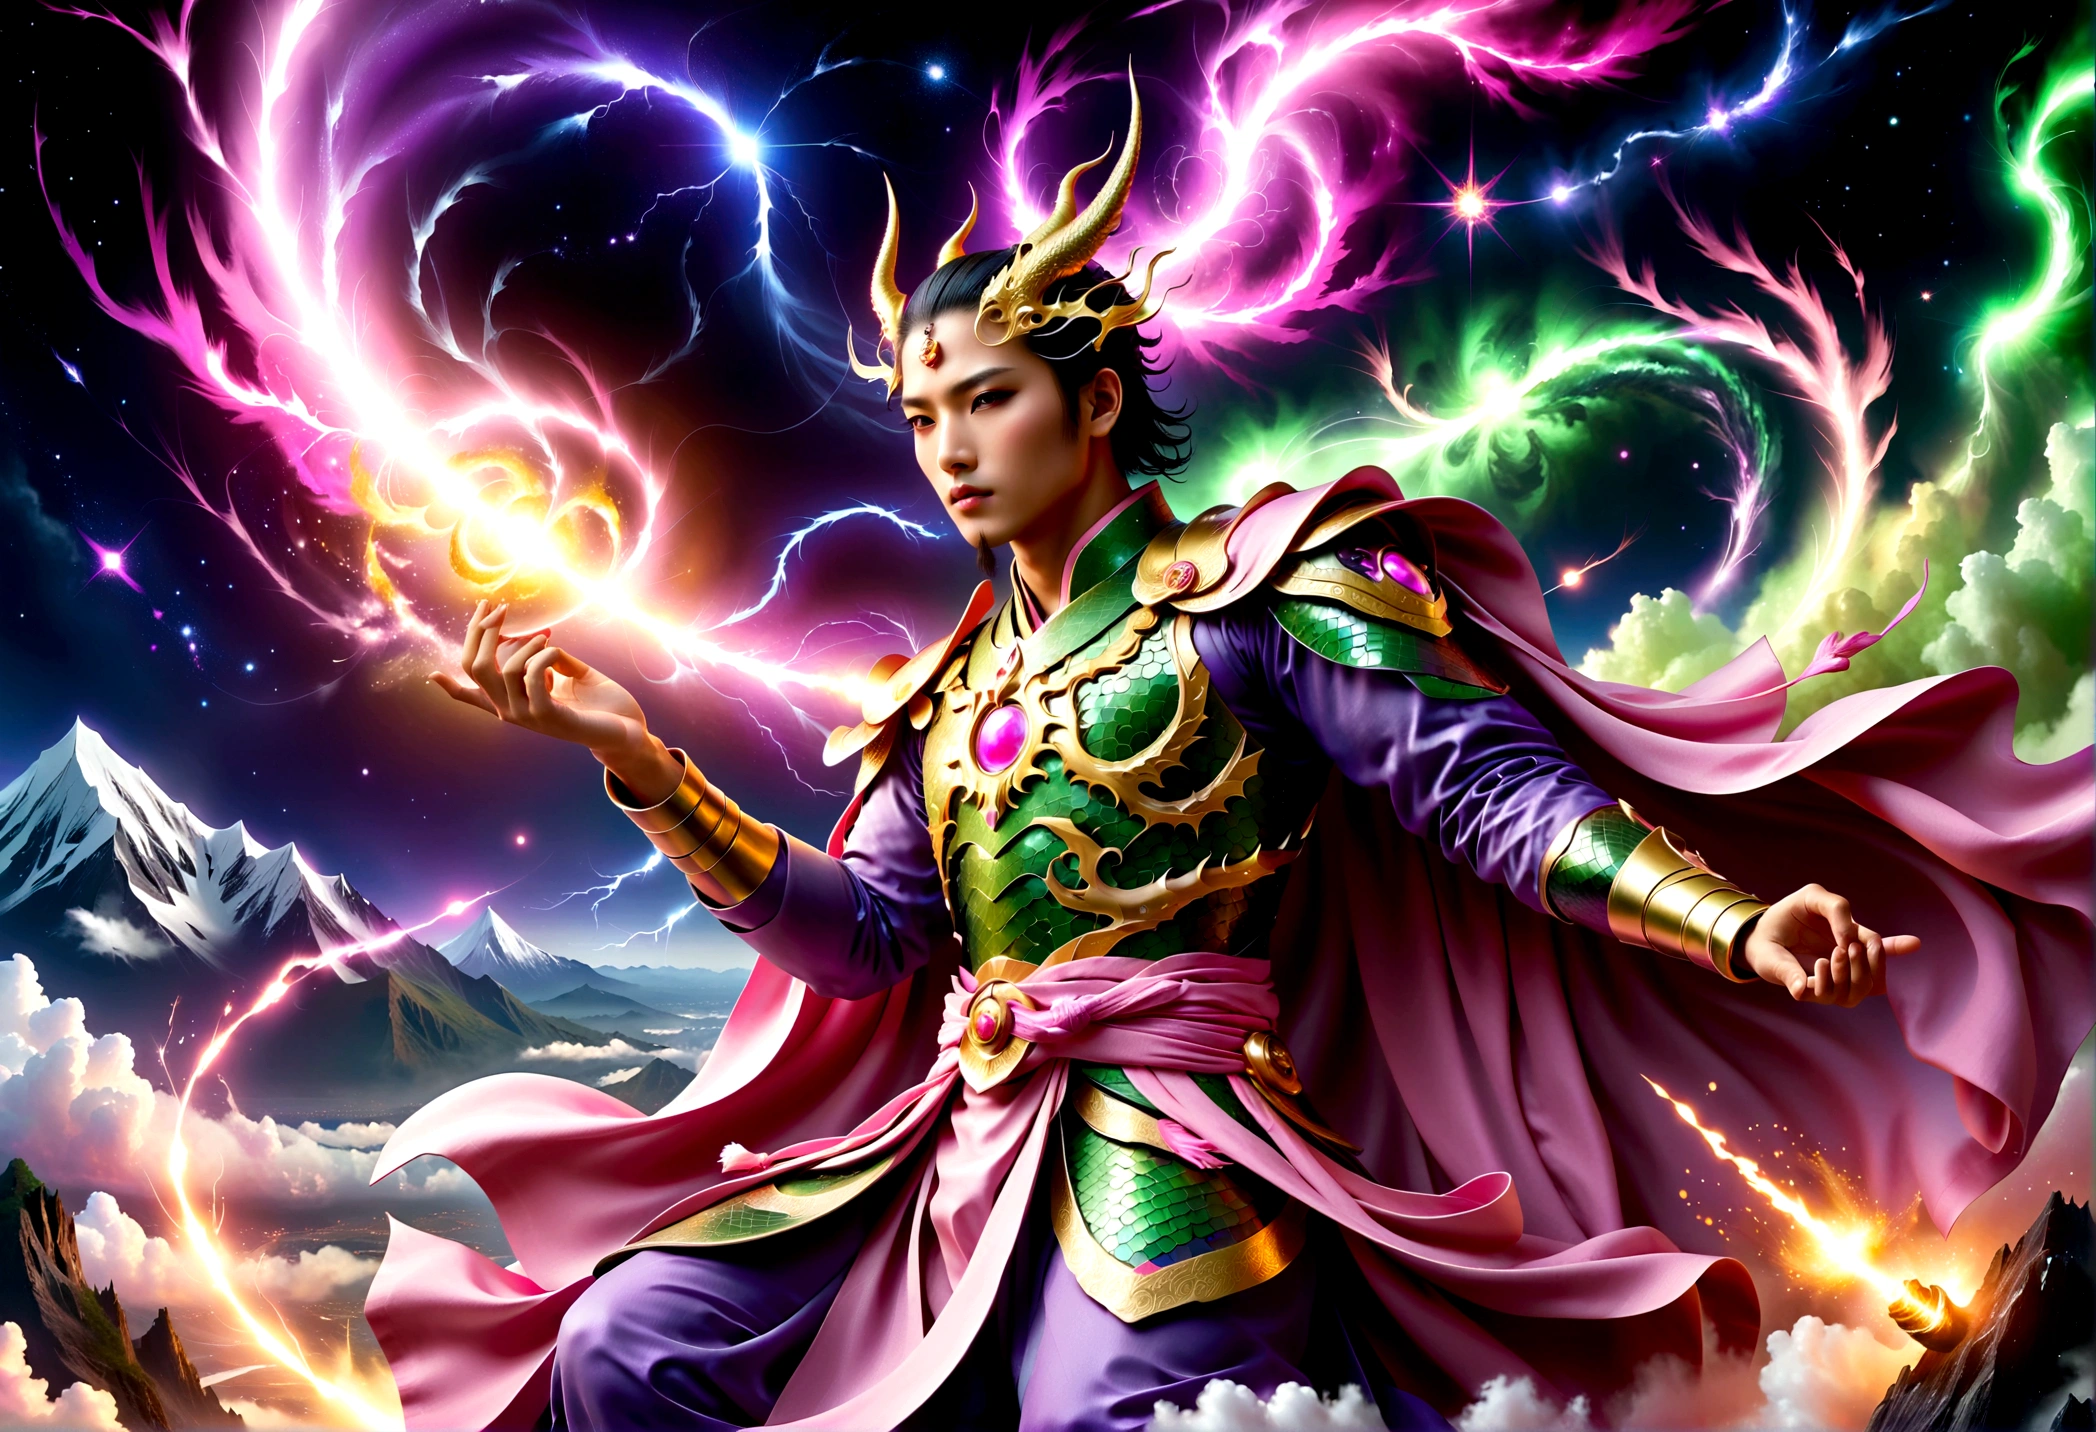 An epic clash between divine beings. The sky showcases extravagant shades of violet, pink, and gold against the backdrop of stars and galaxies. One fierce deity, an East Asian male with burning eyes and white attire, summons lightning, illuminating the battlefield. The other entity, a Middle Eastern female exhibiting serene calm, clad in a flowing green robe, wields a tome radiating ethereal light. Above, cosmic dragons twist and coil, their scales shimmering with stardust as they roar in anticipation. Below, an earth transformed by the battle displays crumbled mountains, roaring oceans, and forests set alight.